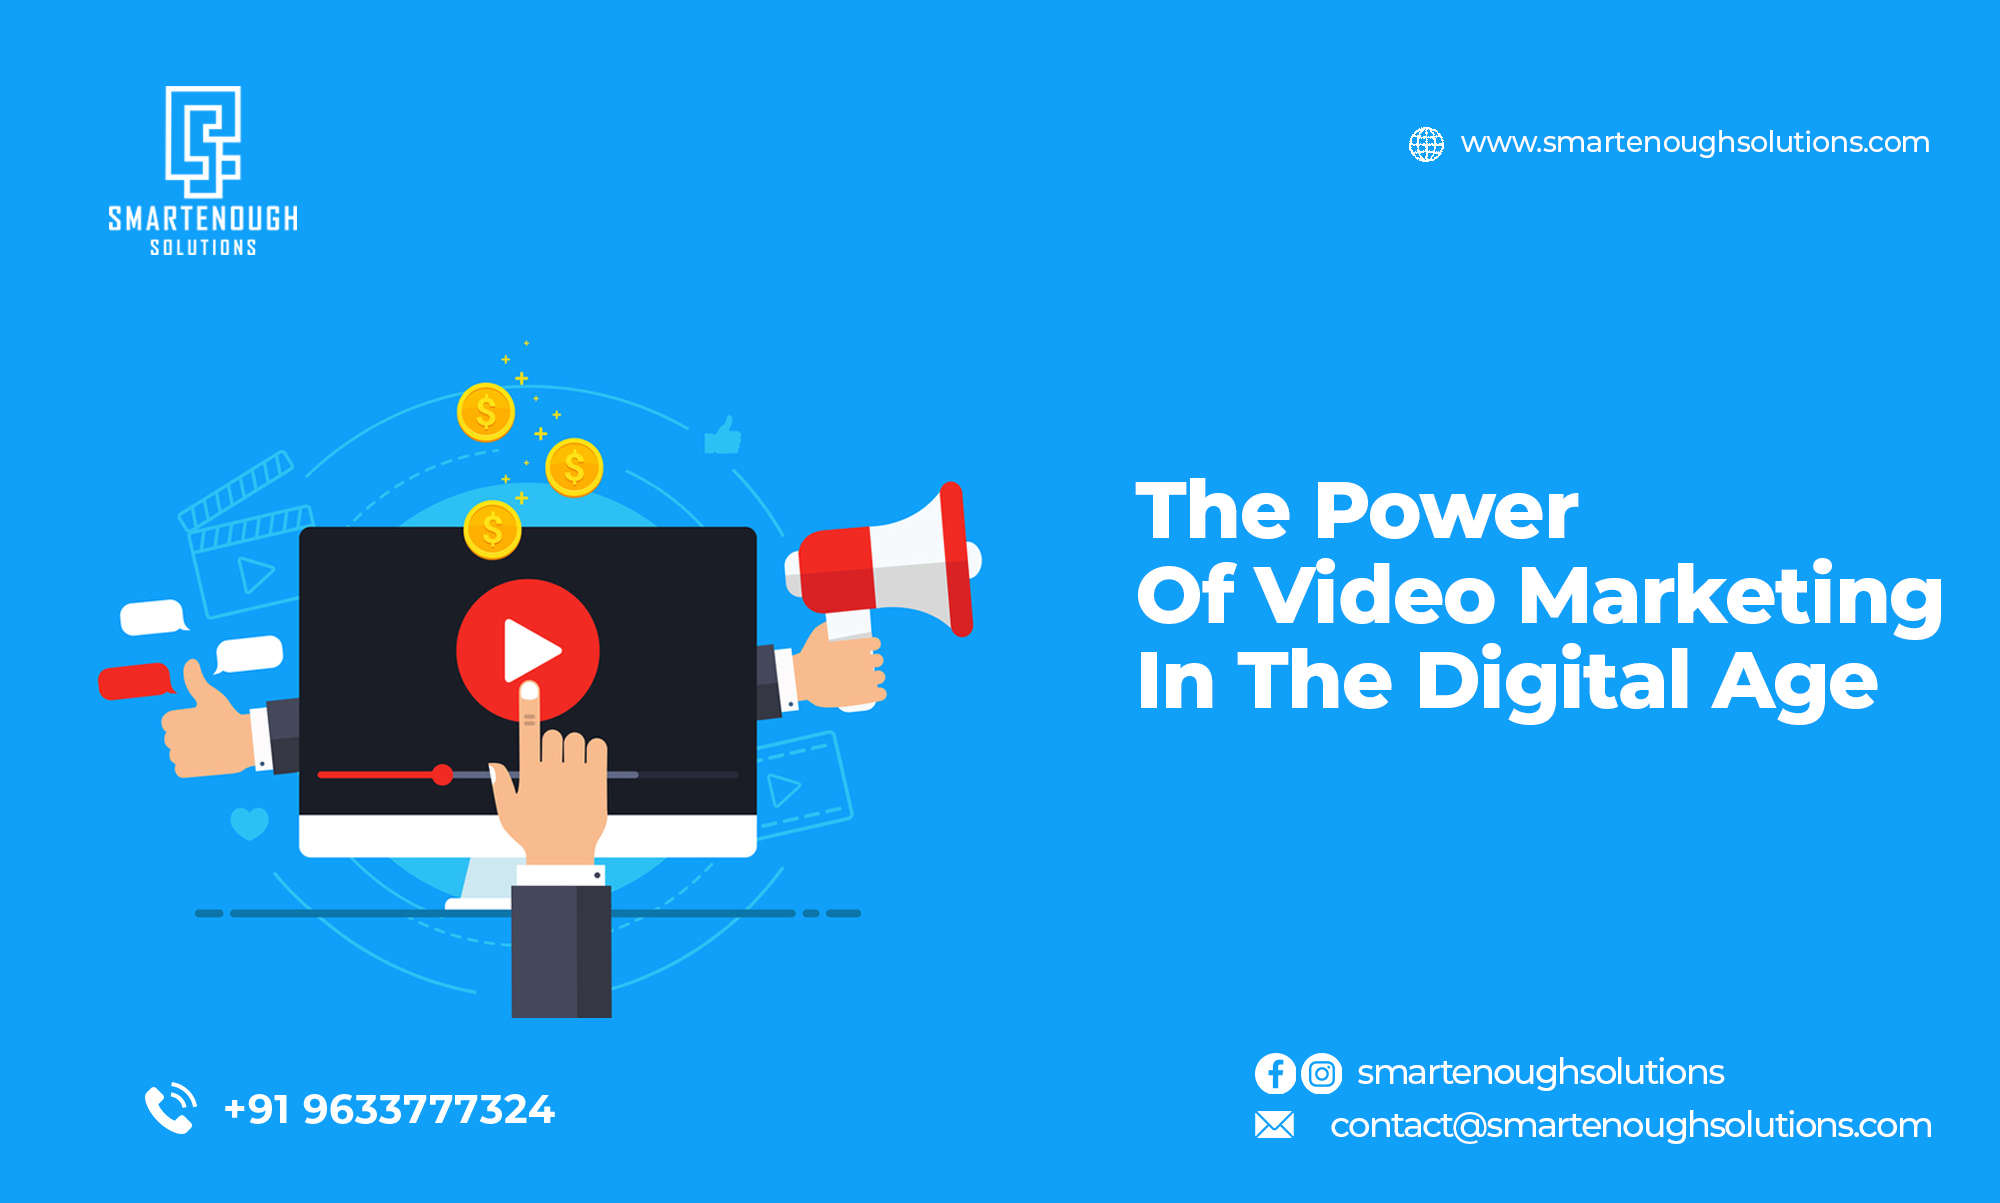 The Power of Video Marketing in the Digital Age